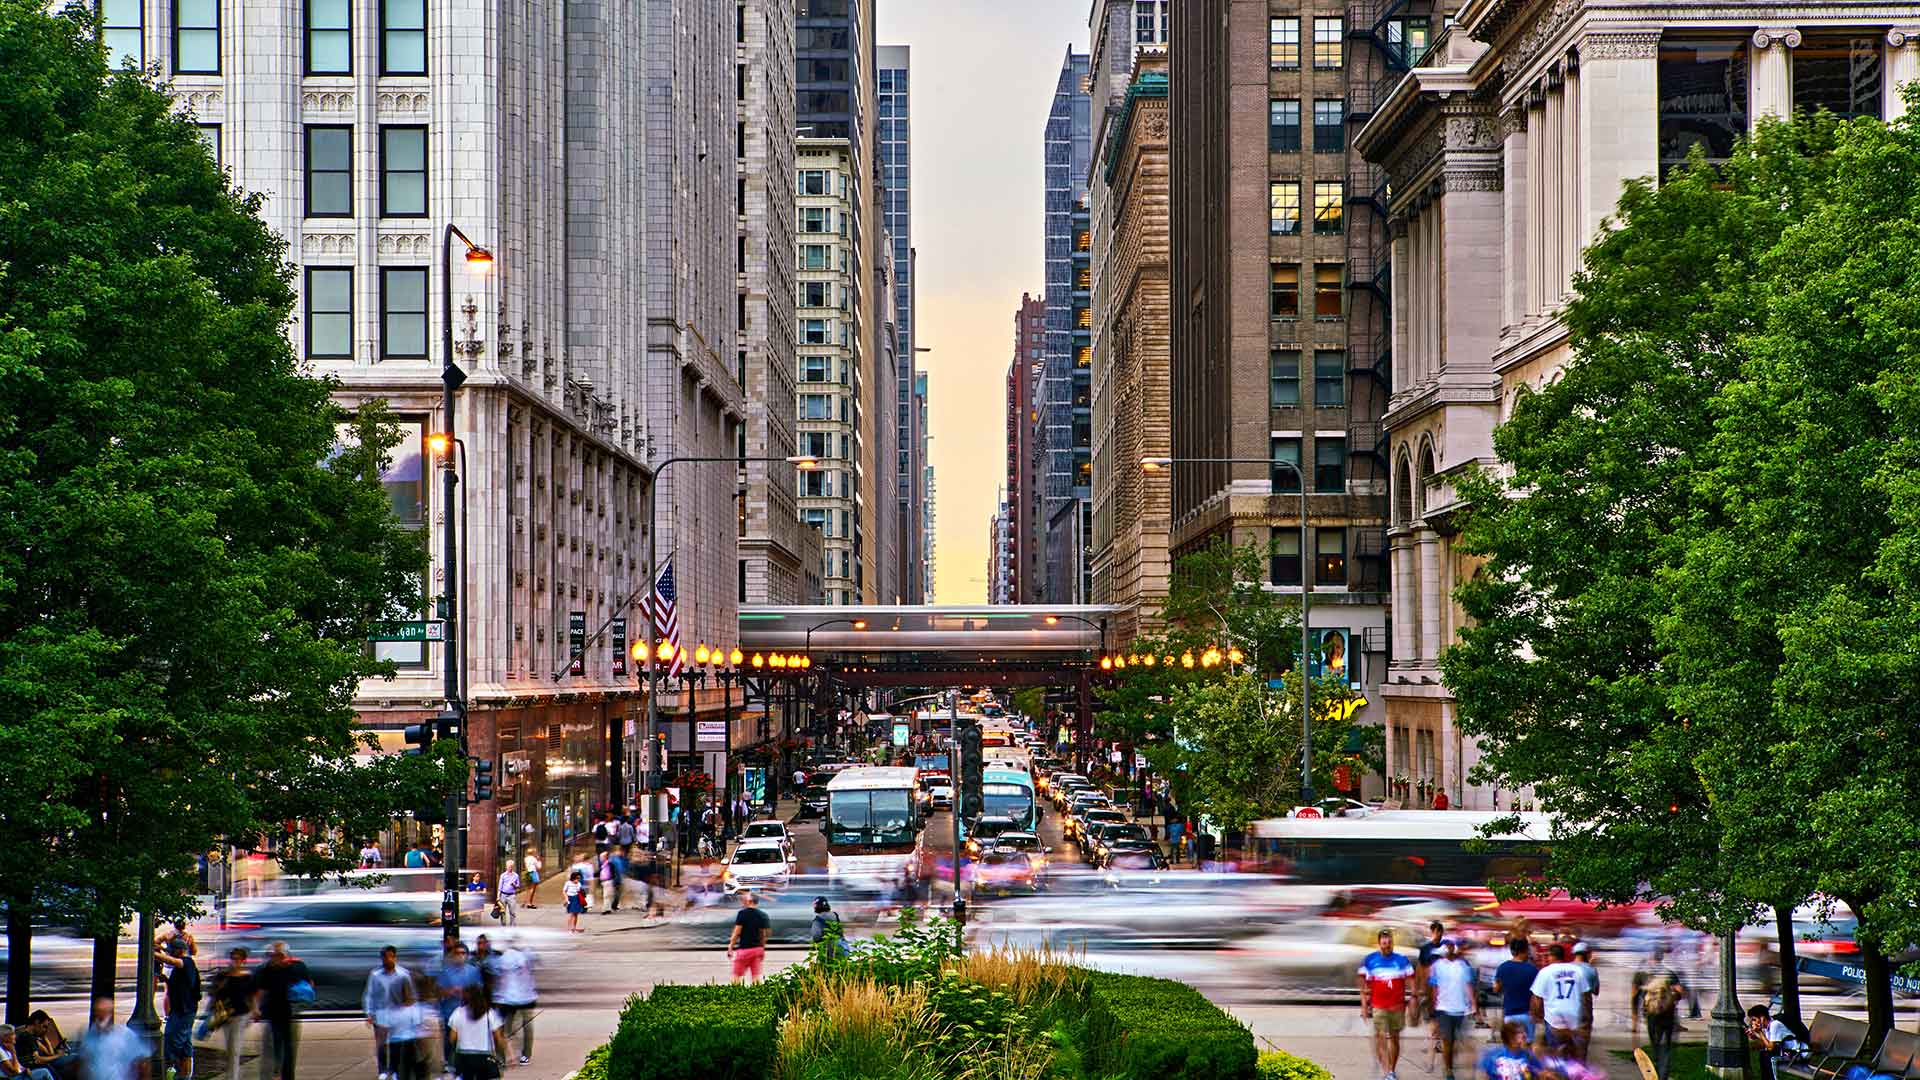 Looking down a city street in Chicago. The elevated train passes over the street a block ahead. There are people walking all over and cars driving.